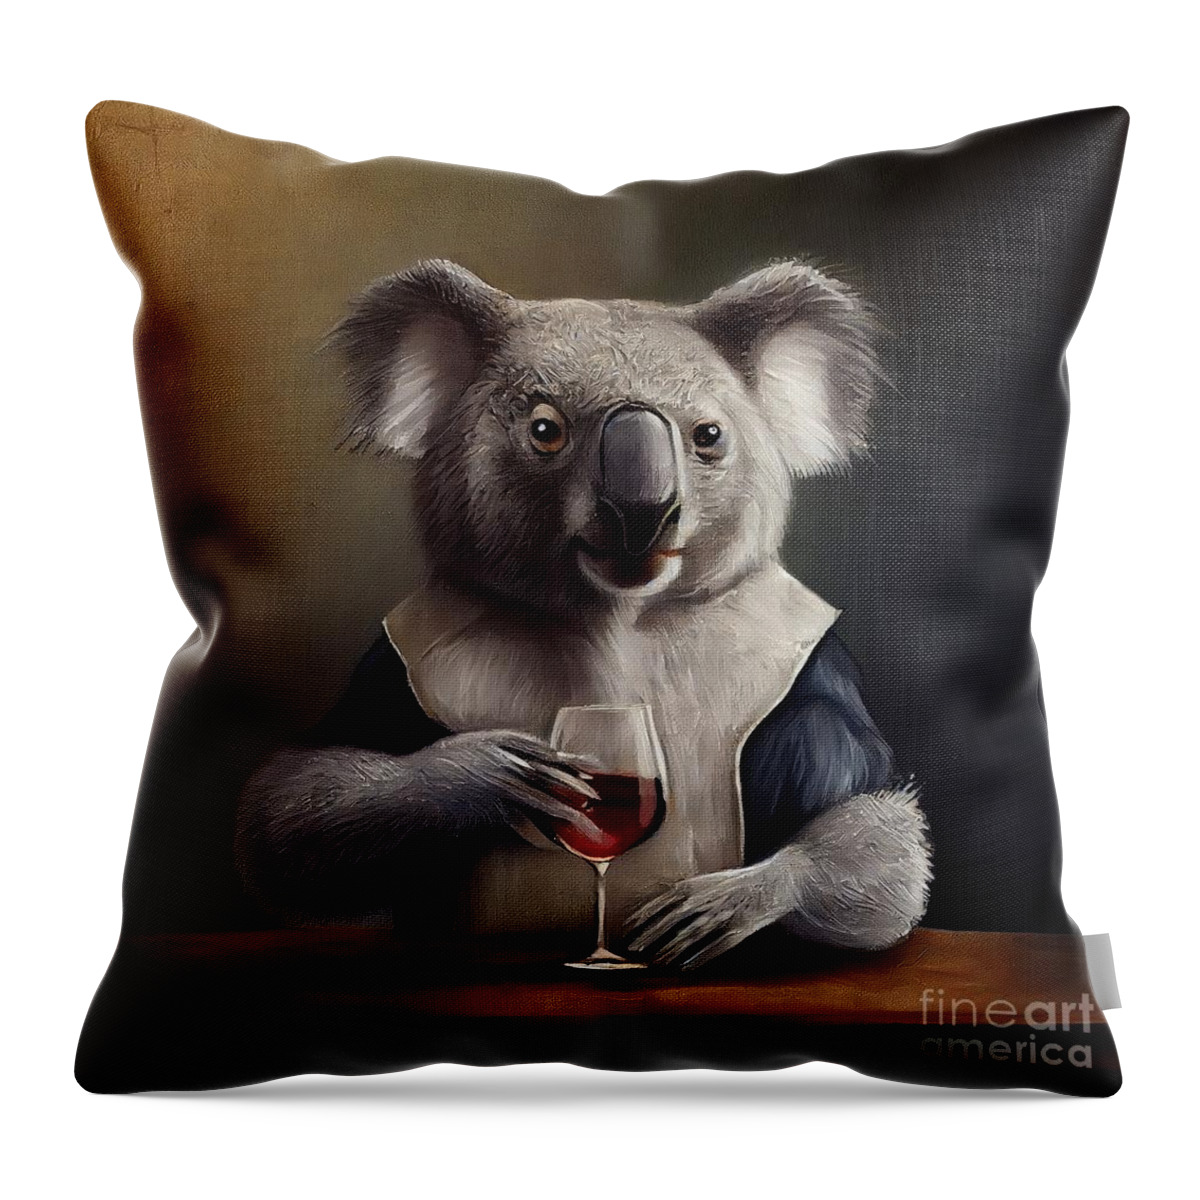 Nature Throw Pillow featuring the painting Koala Having Drink by N Akkash